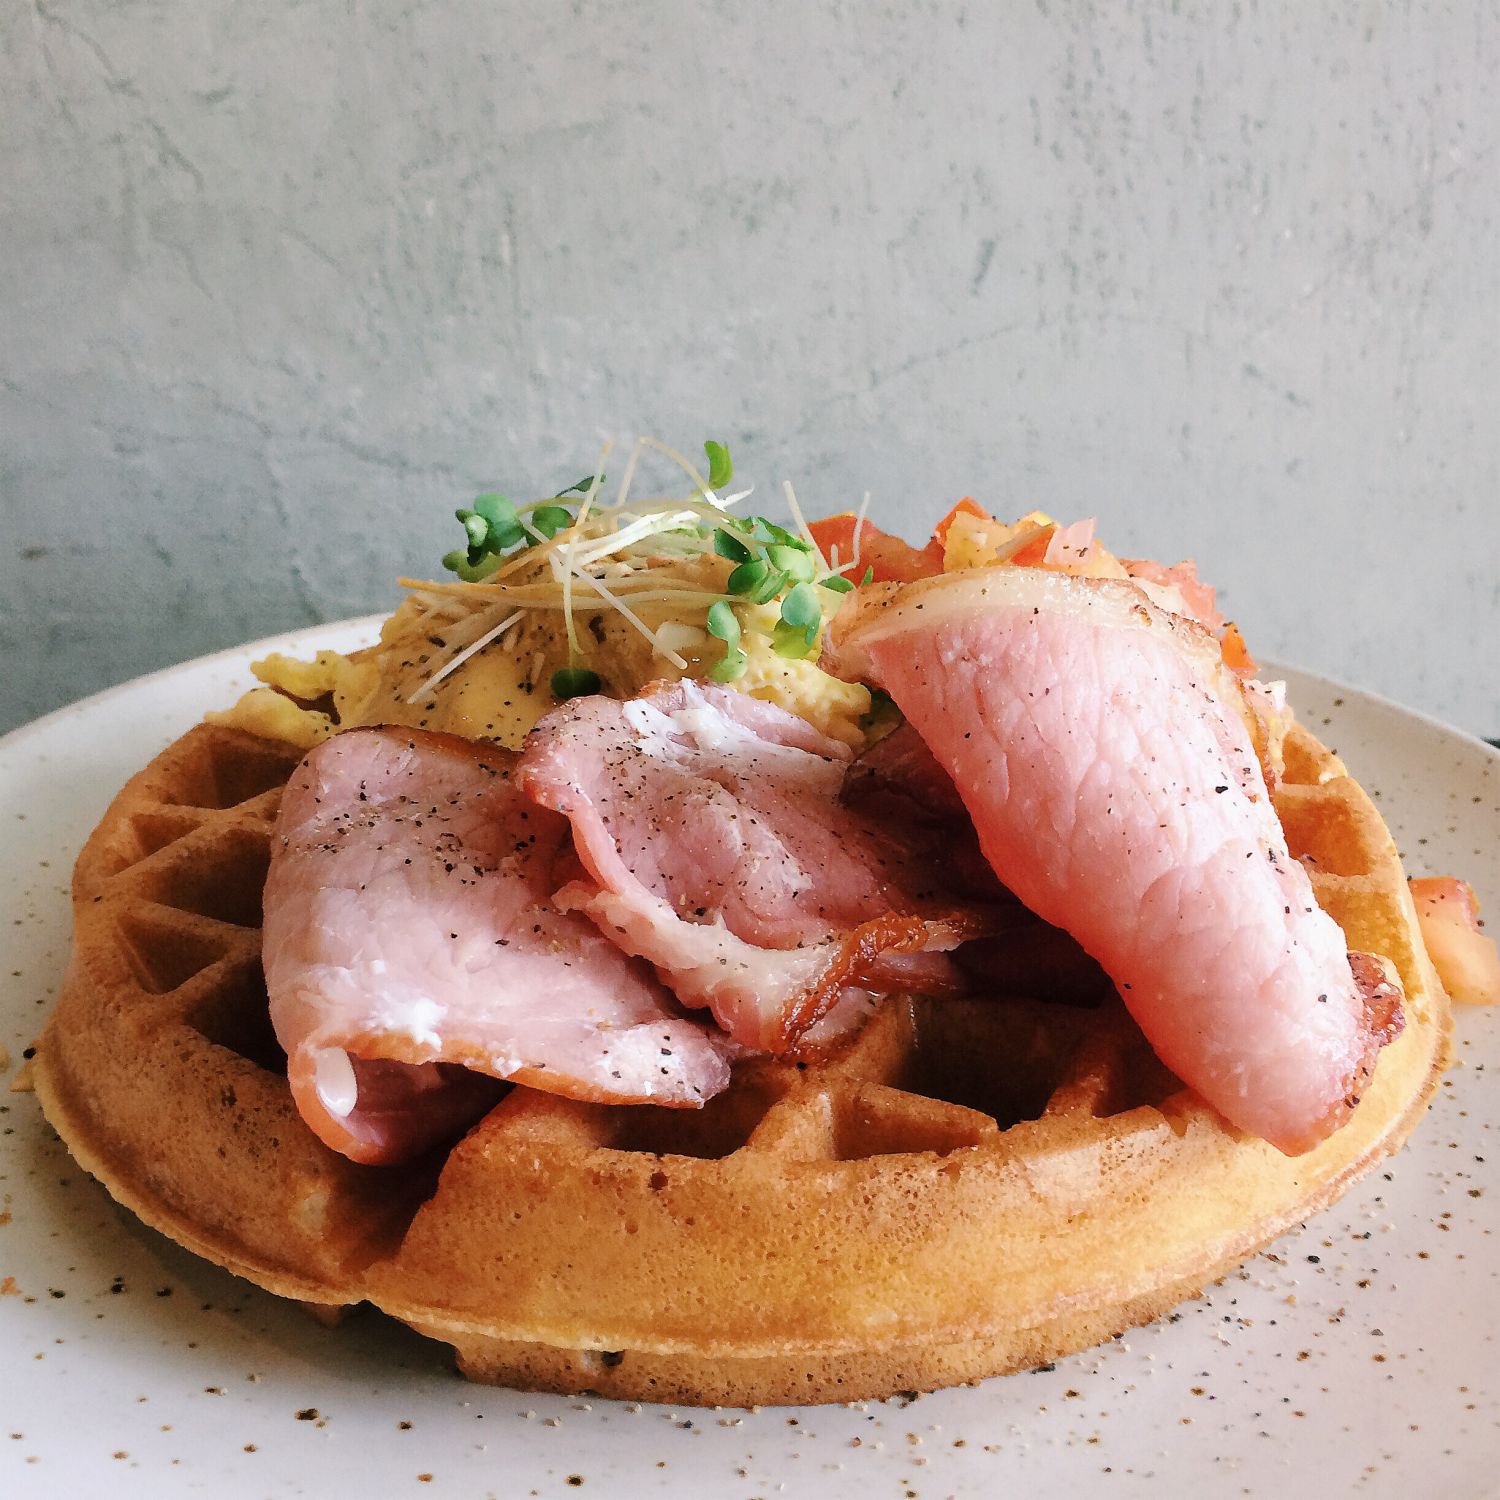 Savoury Waffle with Bacon - Craftsmen Specialty Coffee